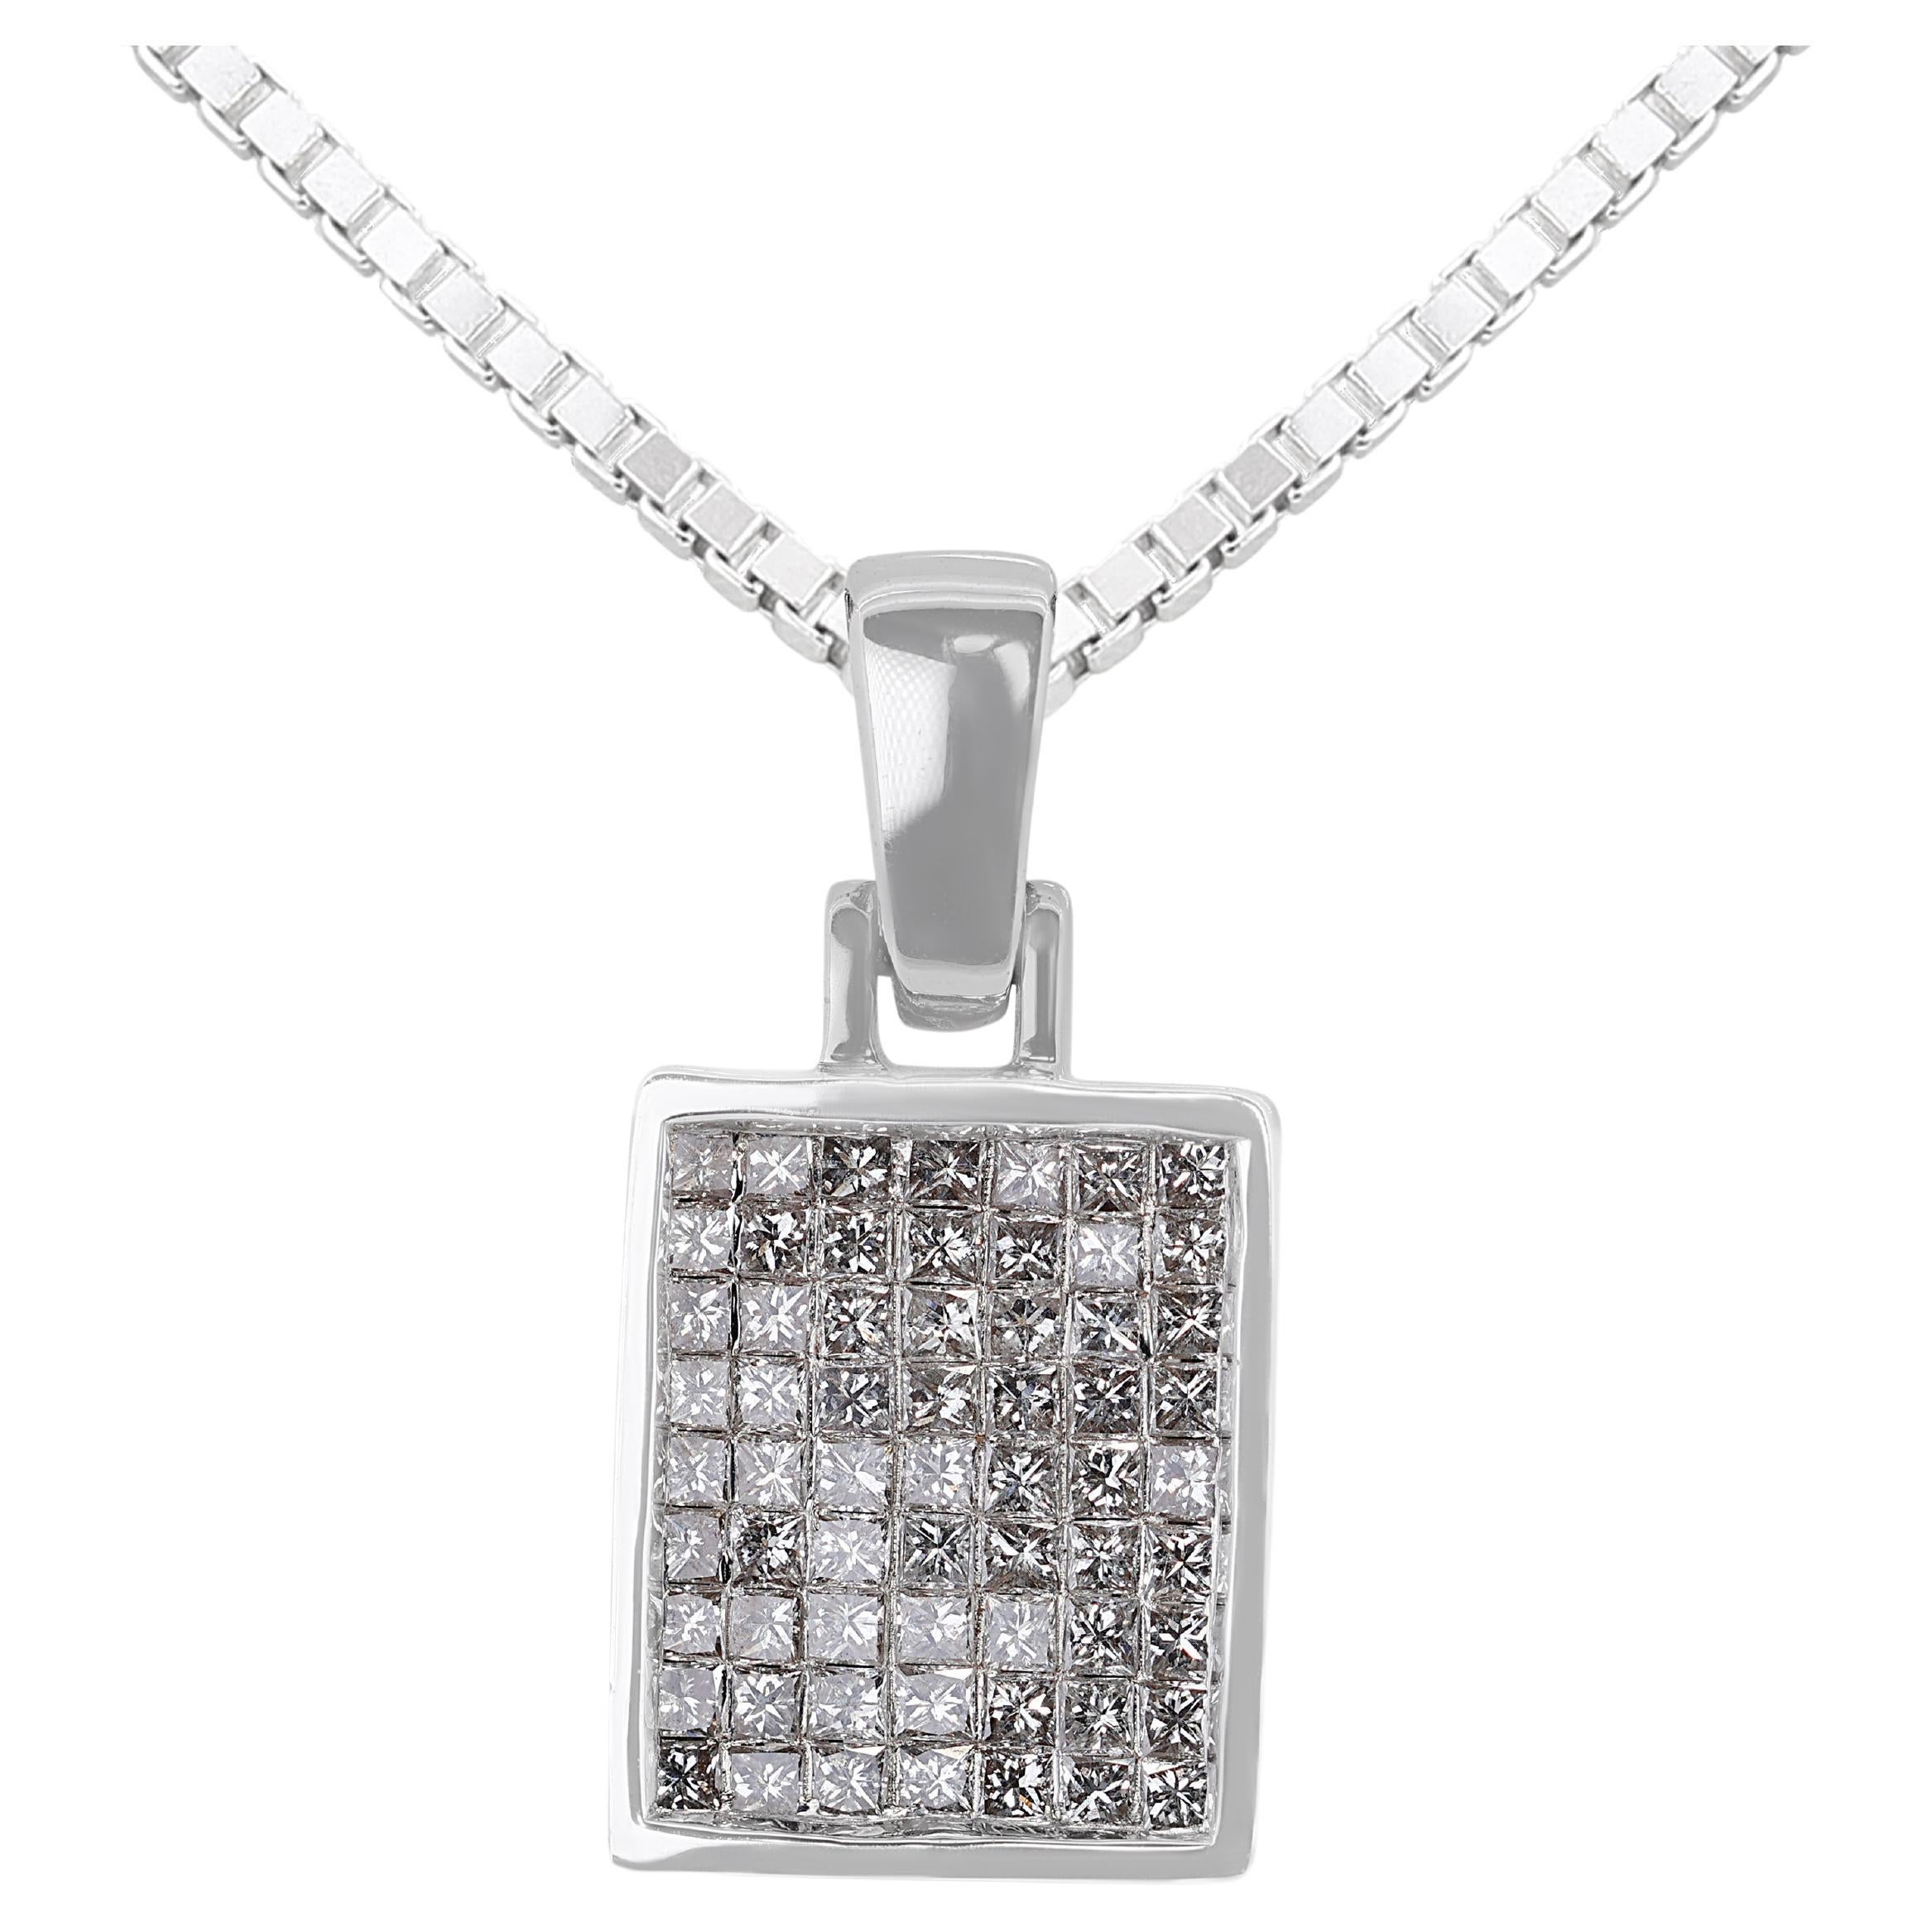 Dazzling 0.63ct Diamonds Pendant in 18K White Gold - (Chain Not Included)